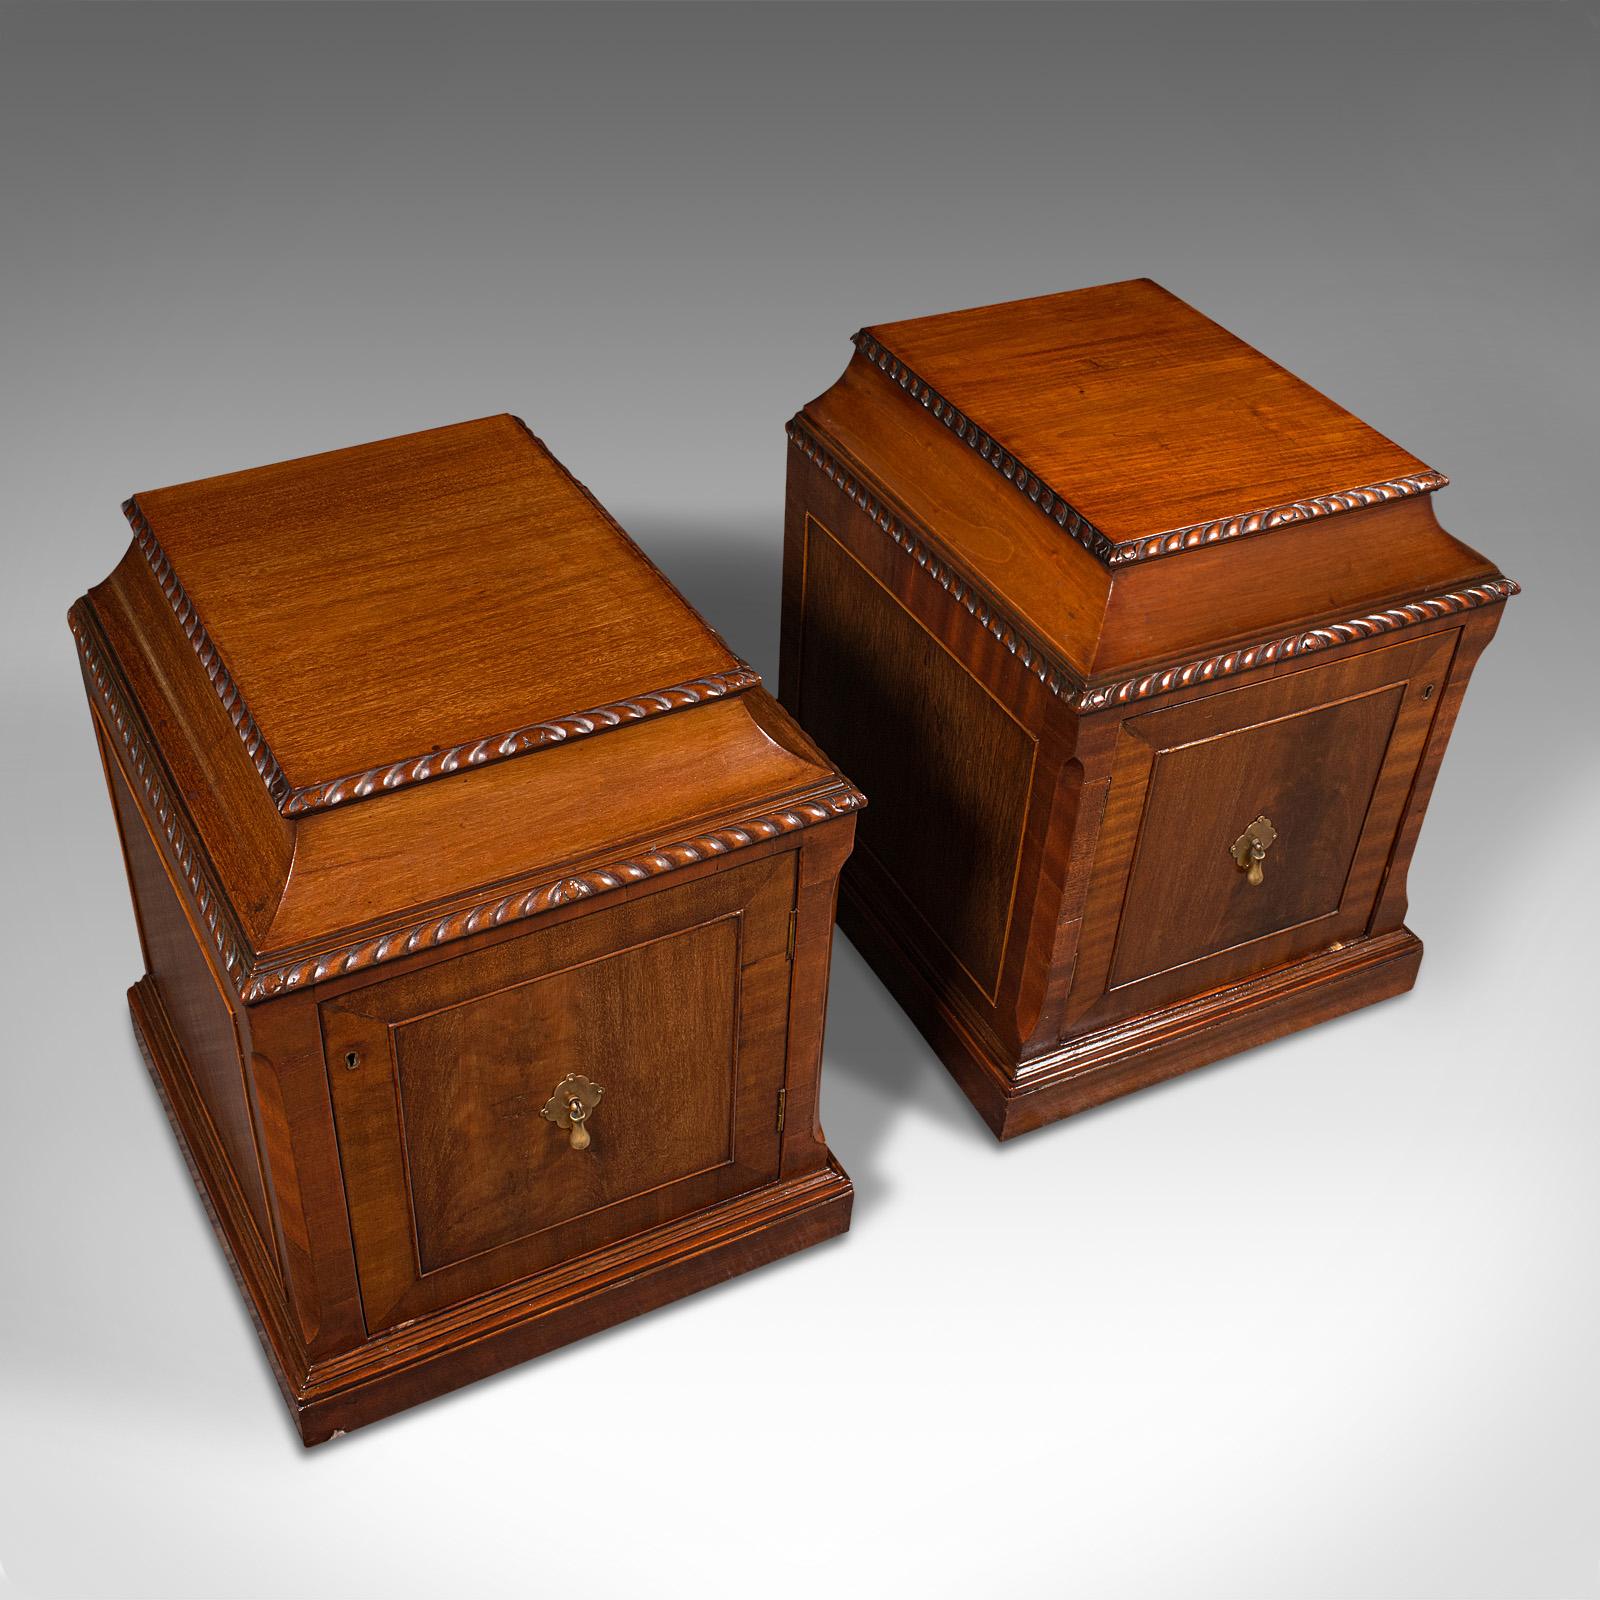 Pair of Antique Nightstands, English, Bedside, Fireside Cabinet, William IV 1